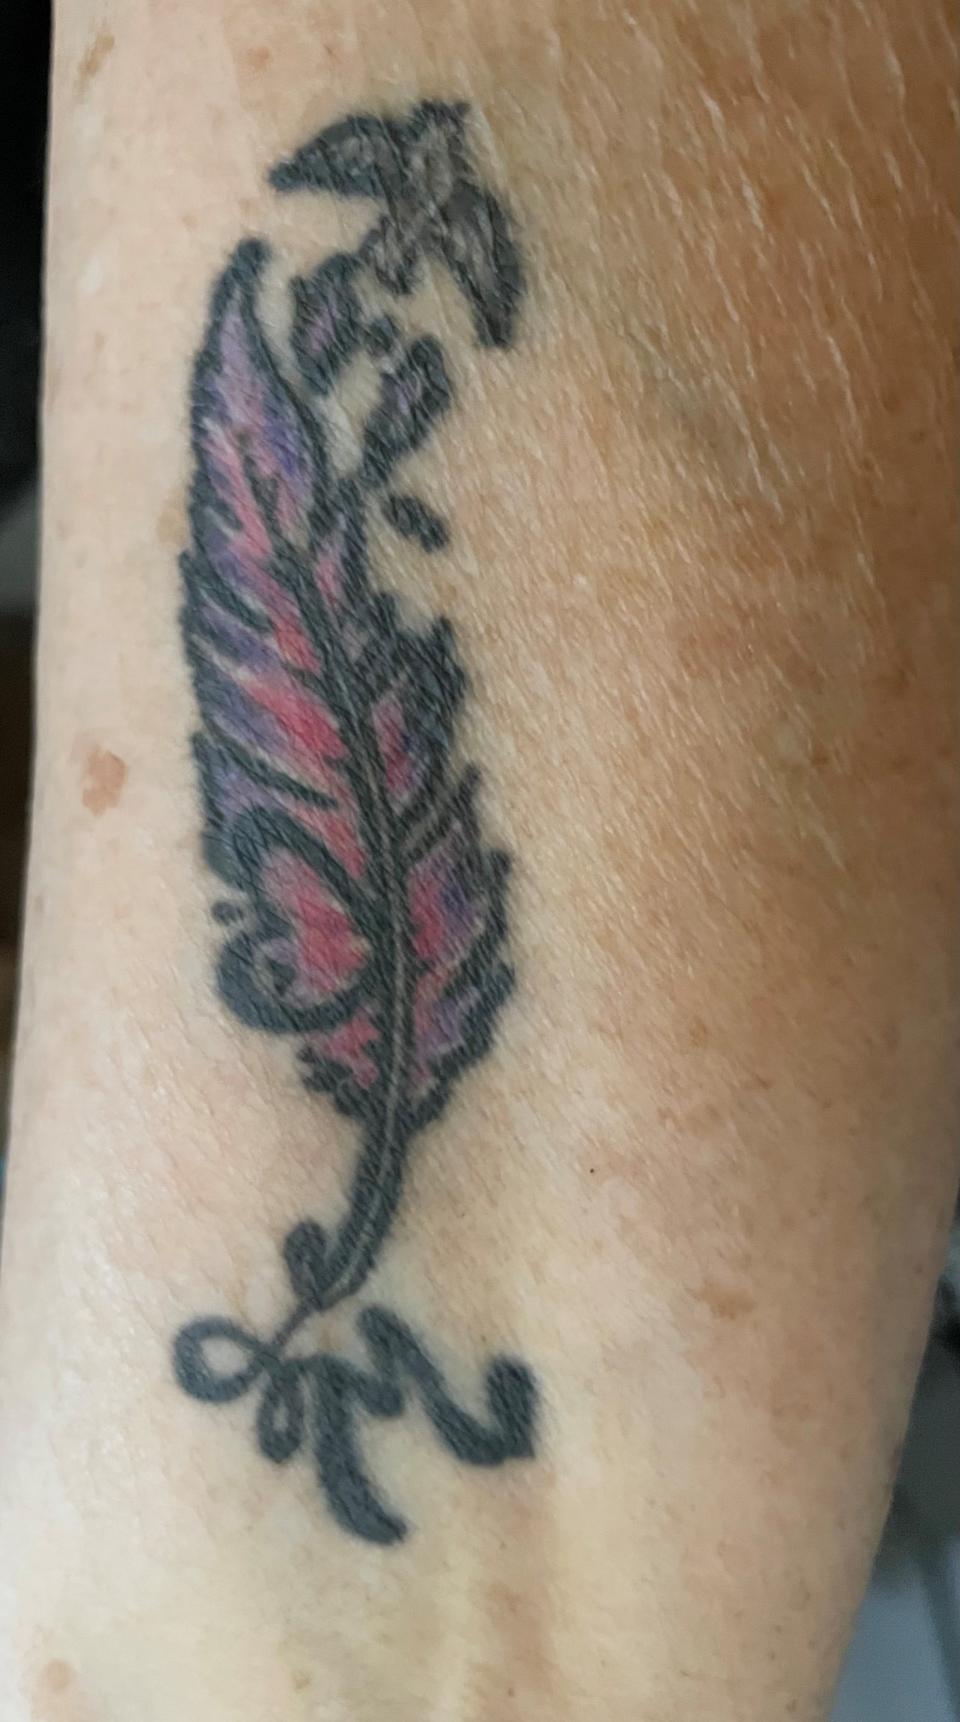 Cheryl Cook's tattoo represents her late husband Mick using a feather, heart, bird and his initial.